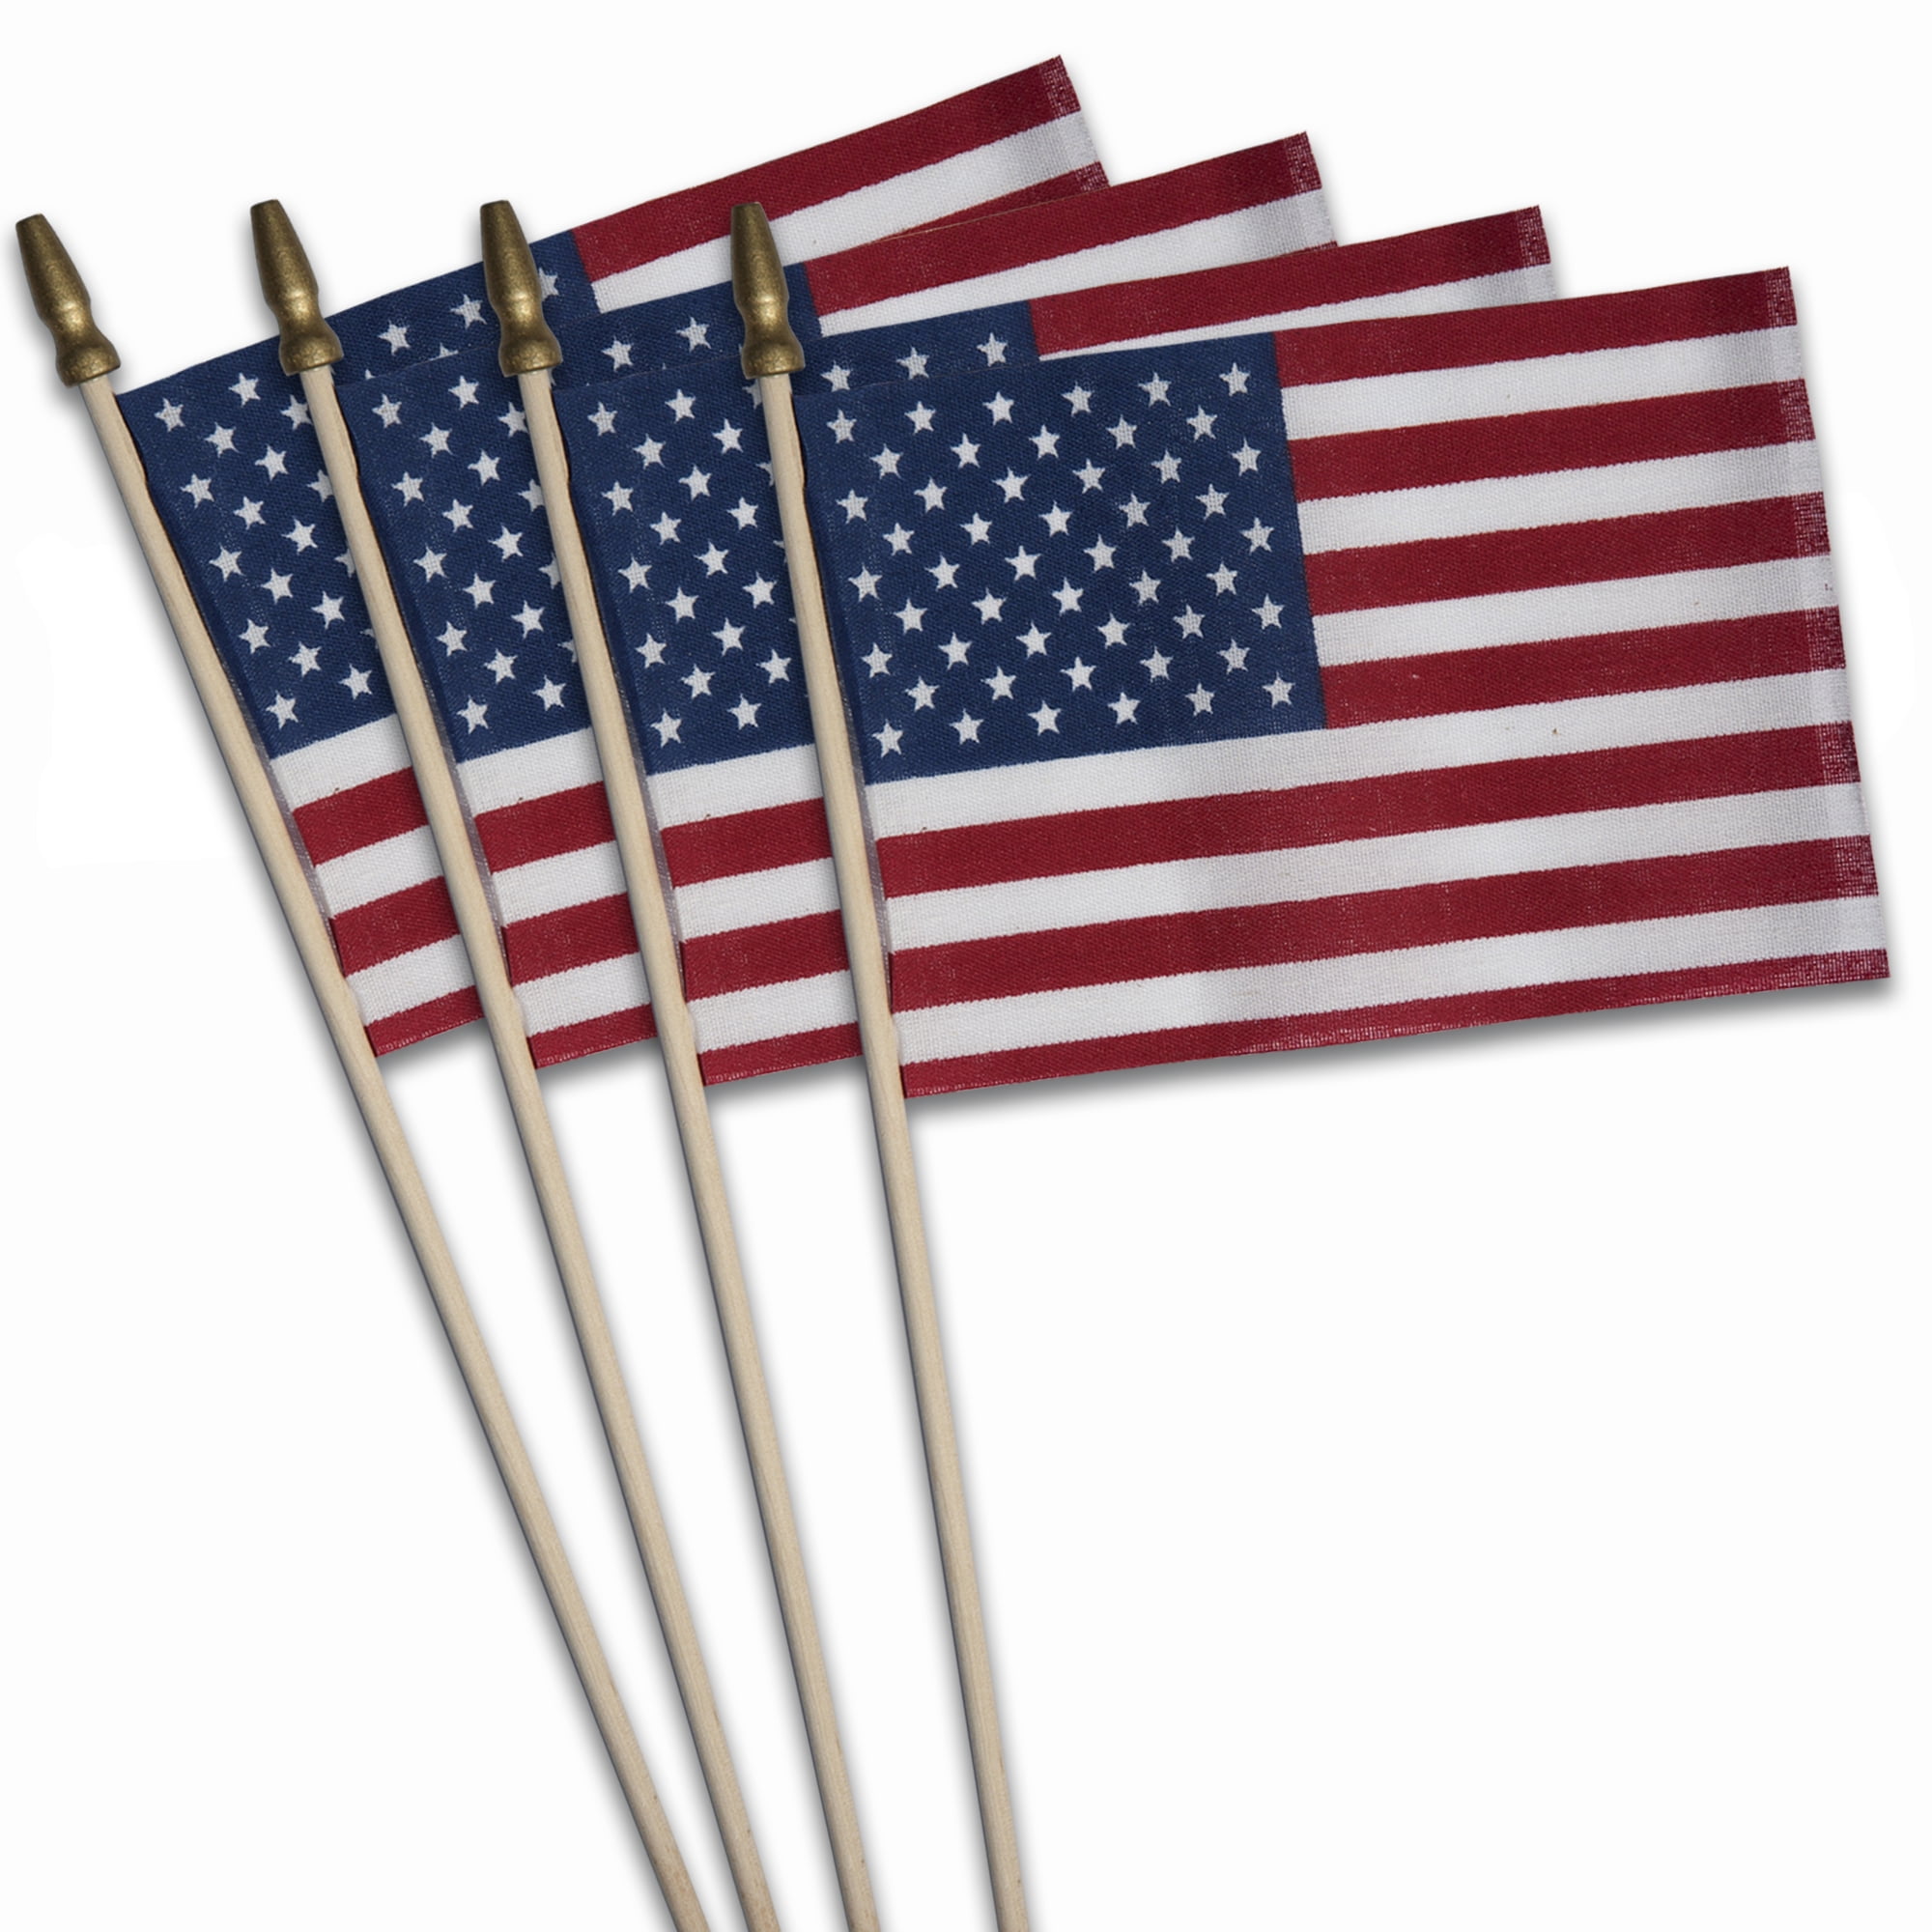 U.S. Made Blue & White Poly Pennant Strings by American Flags Express